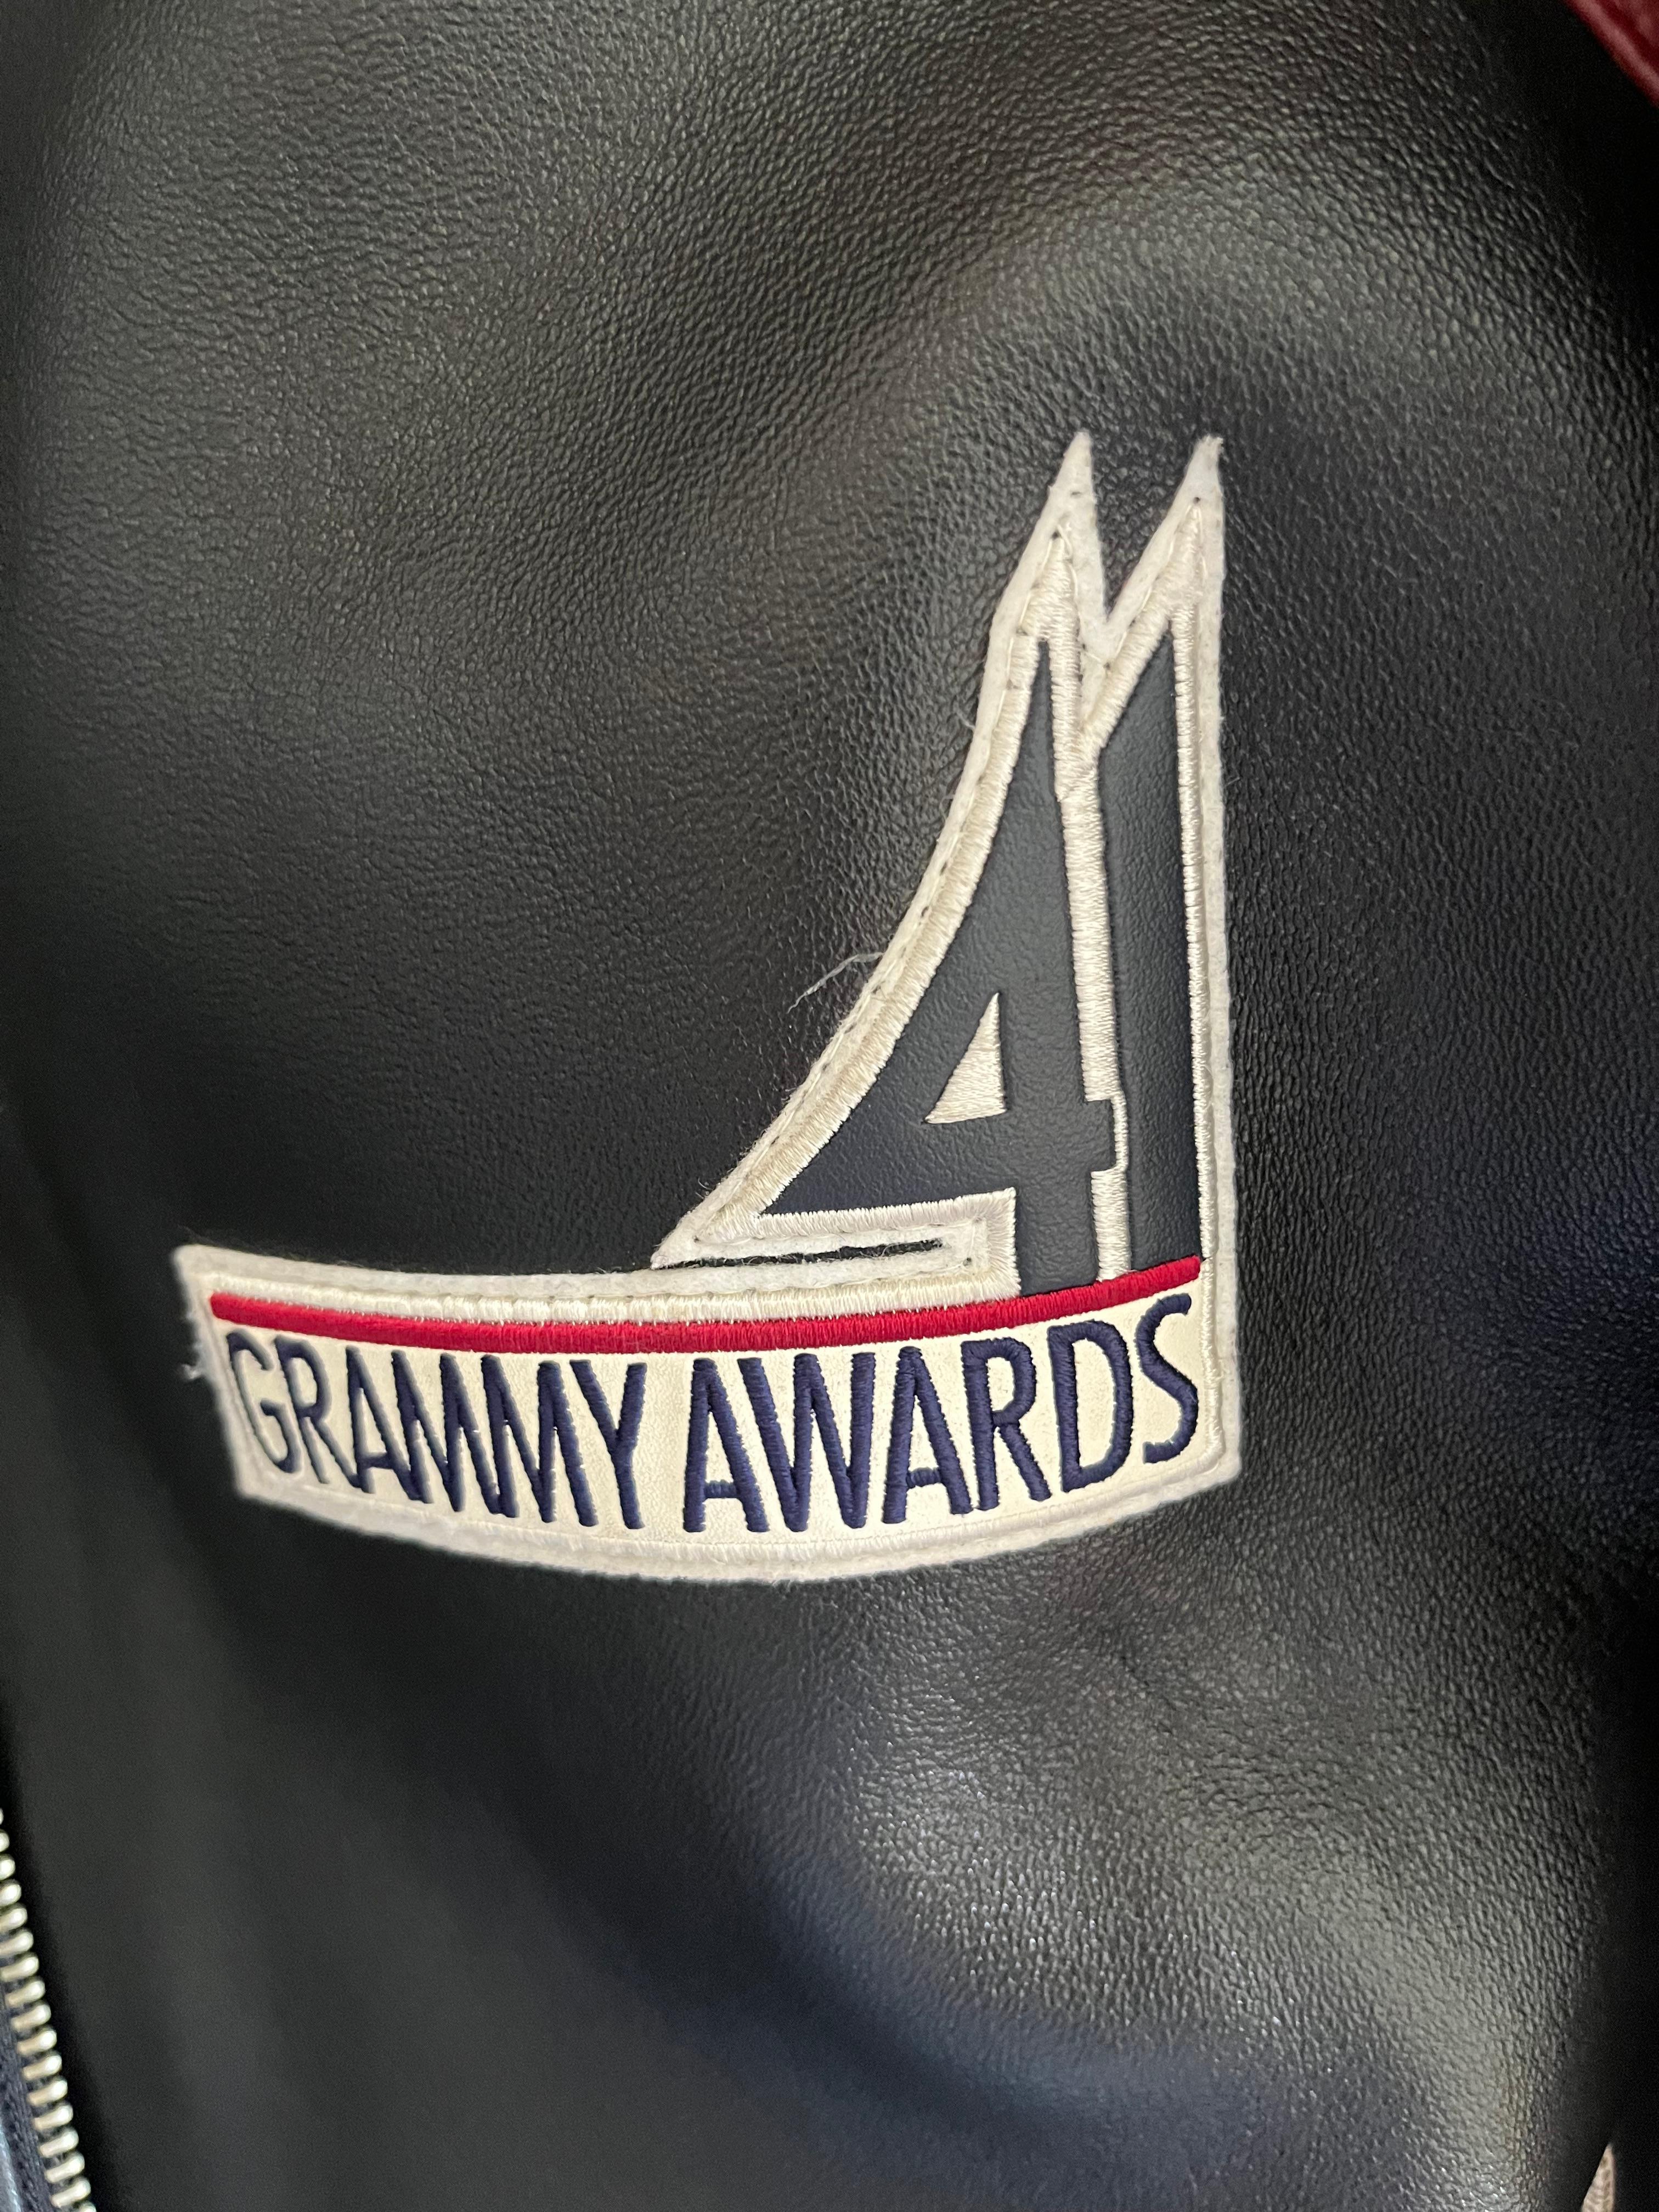 41st Grammy Awards Avirex Leather Jacket XL In Excellent Condition For Sale In Port Hope, ON